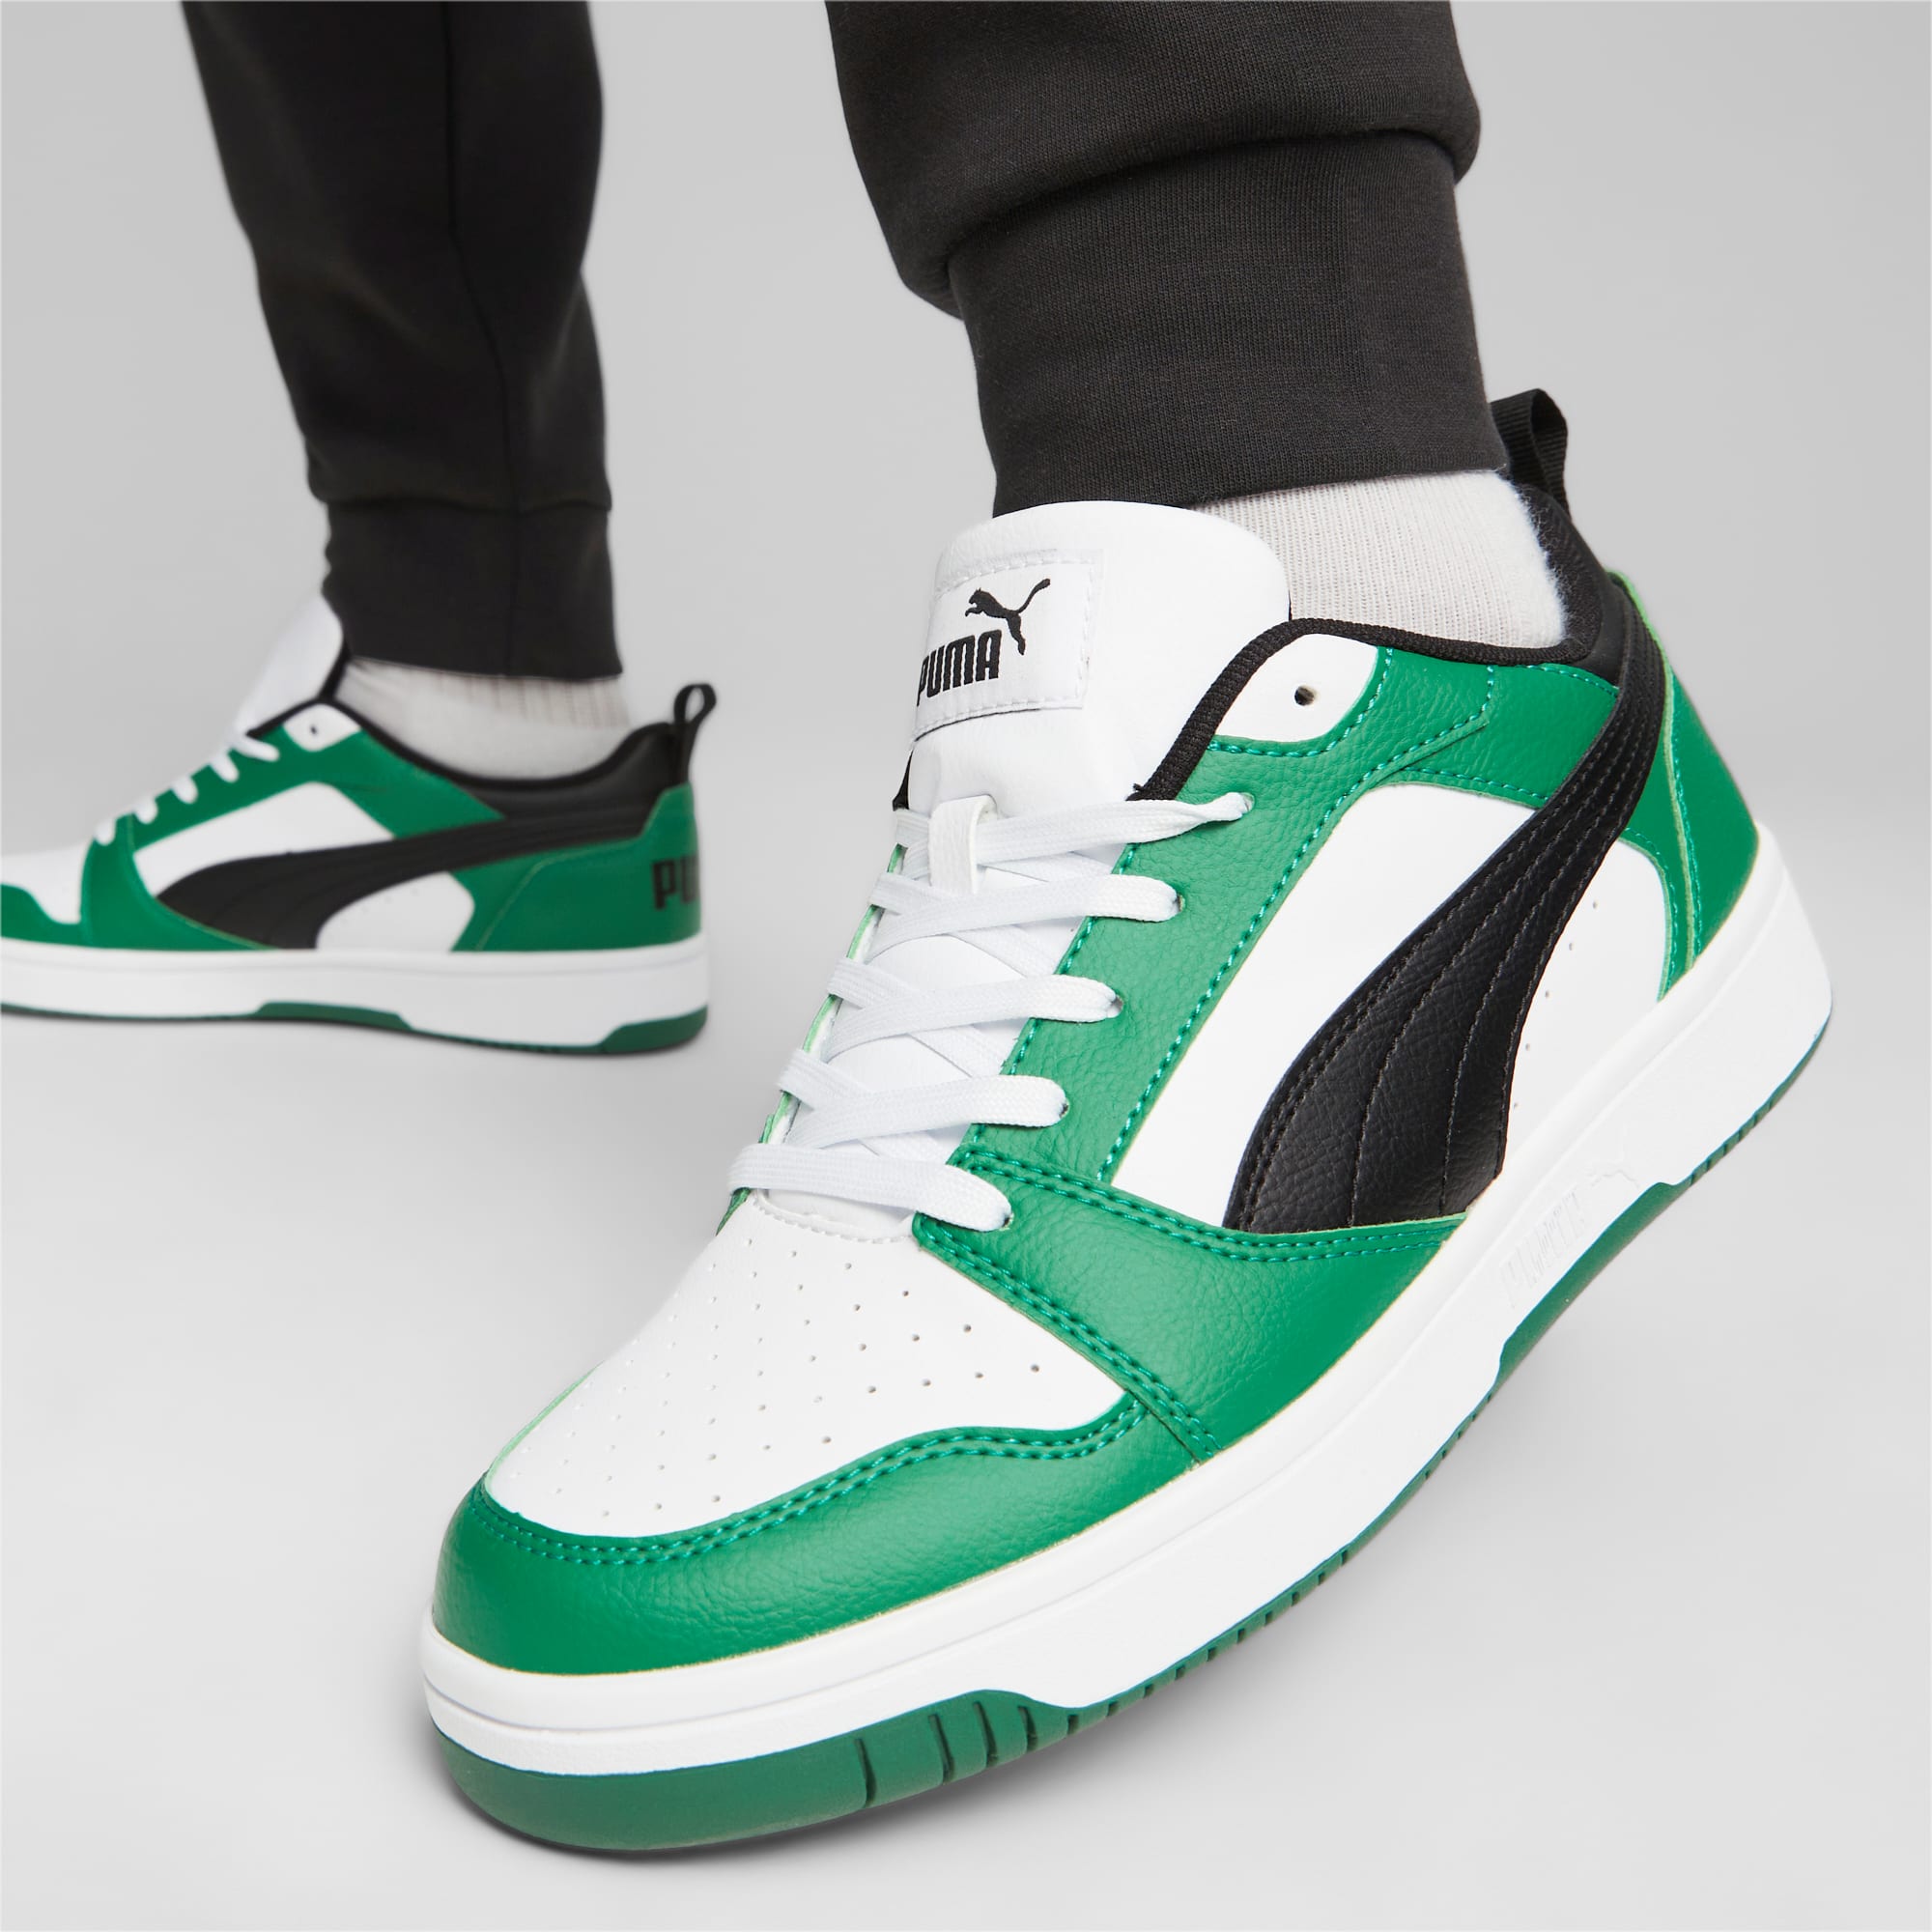 Women's PUMA Rebound V6 Low Sneakers, White/Black/Archive Green, Size 35,5, Shoes